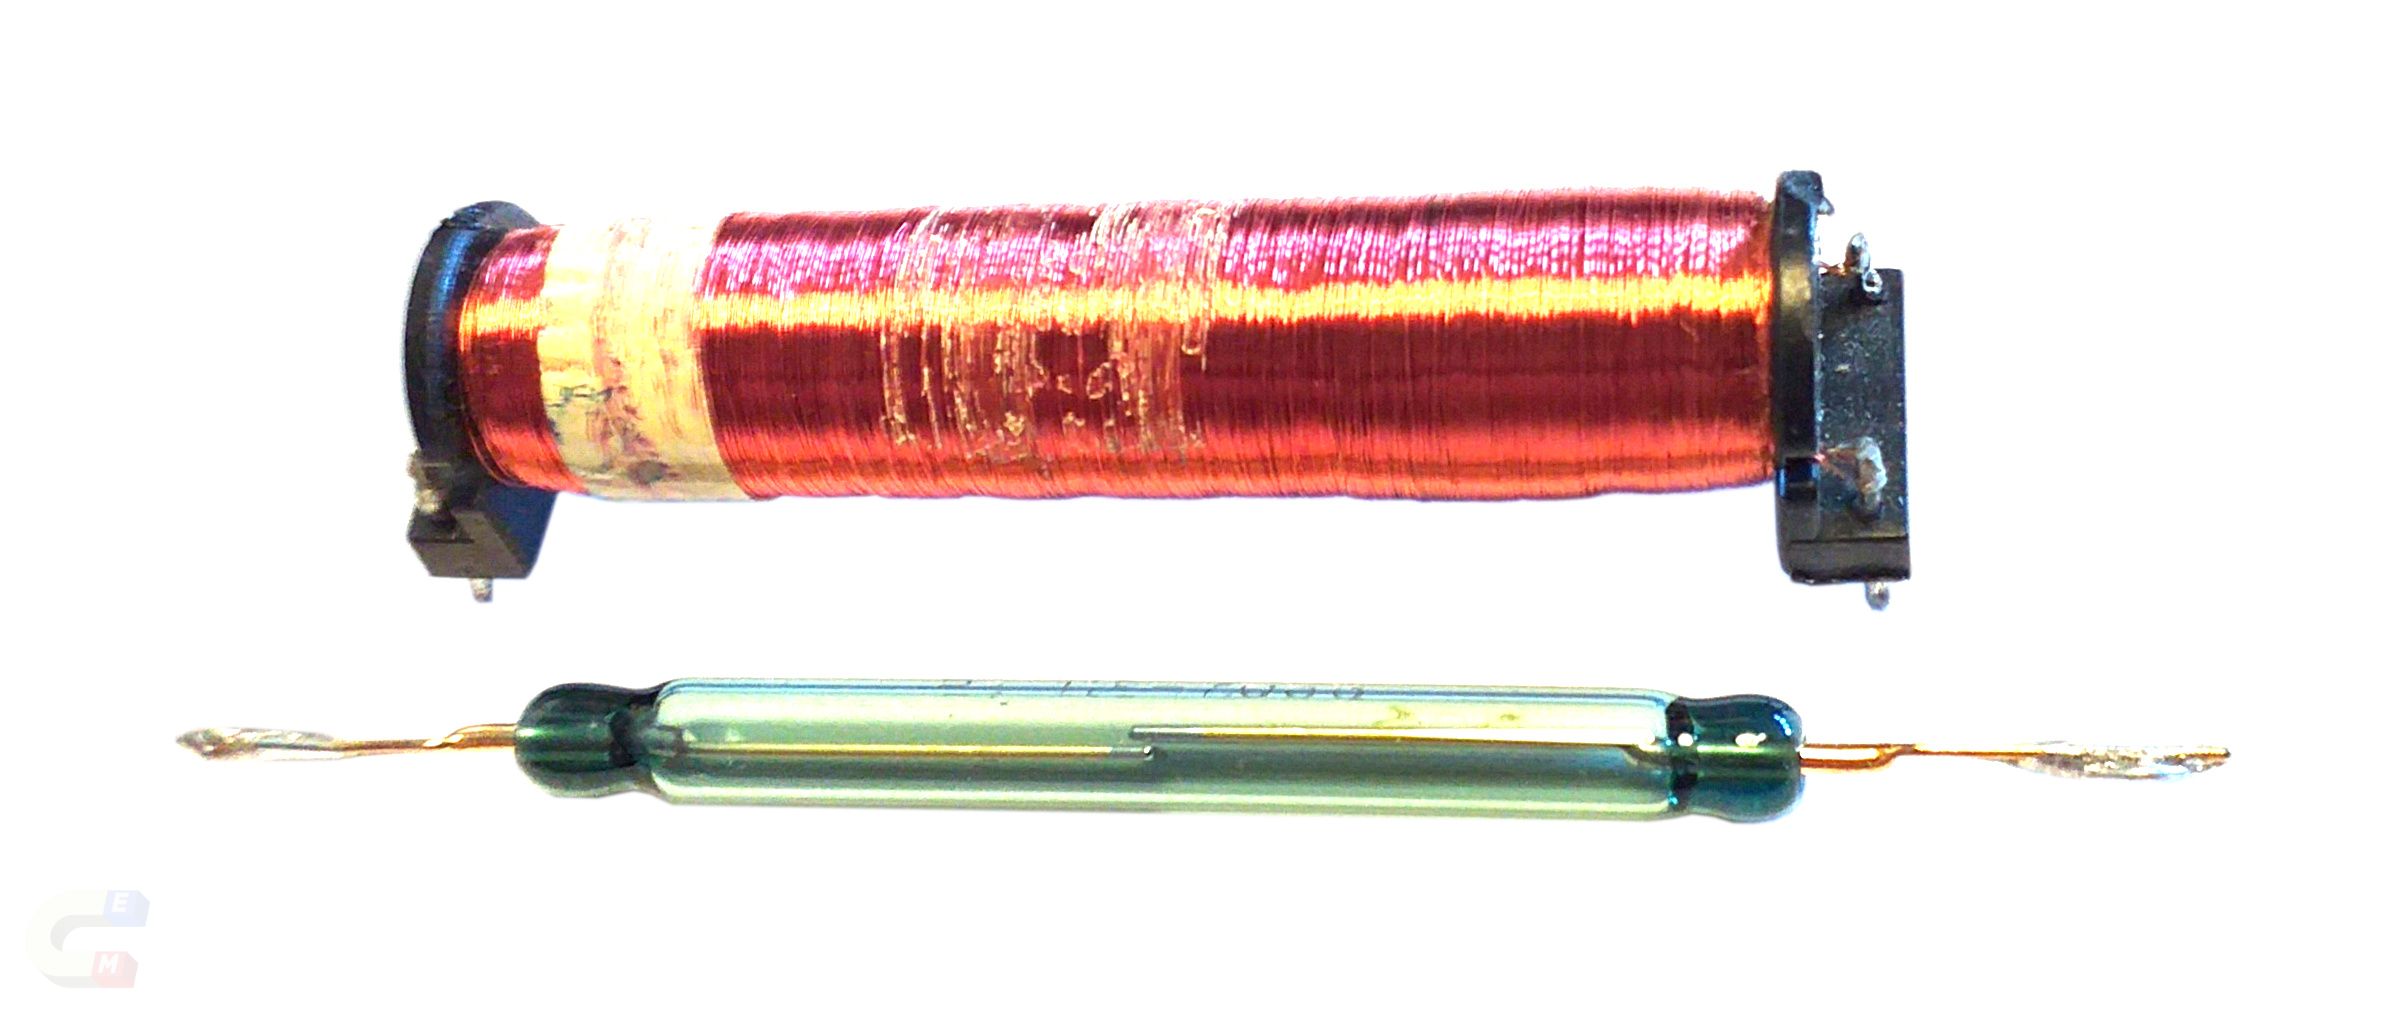 reed_relay_coil_and_tube_4_magnetica.jpg